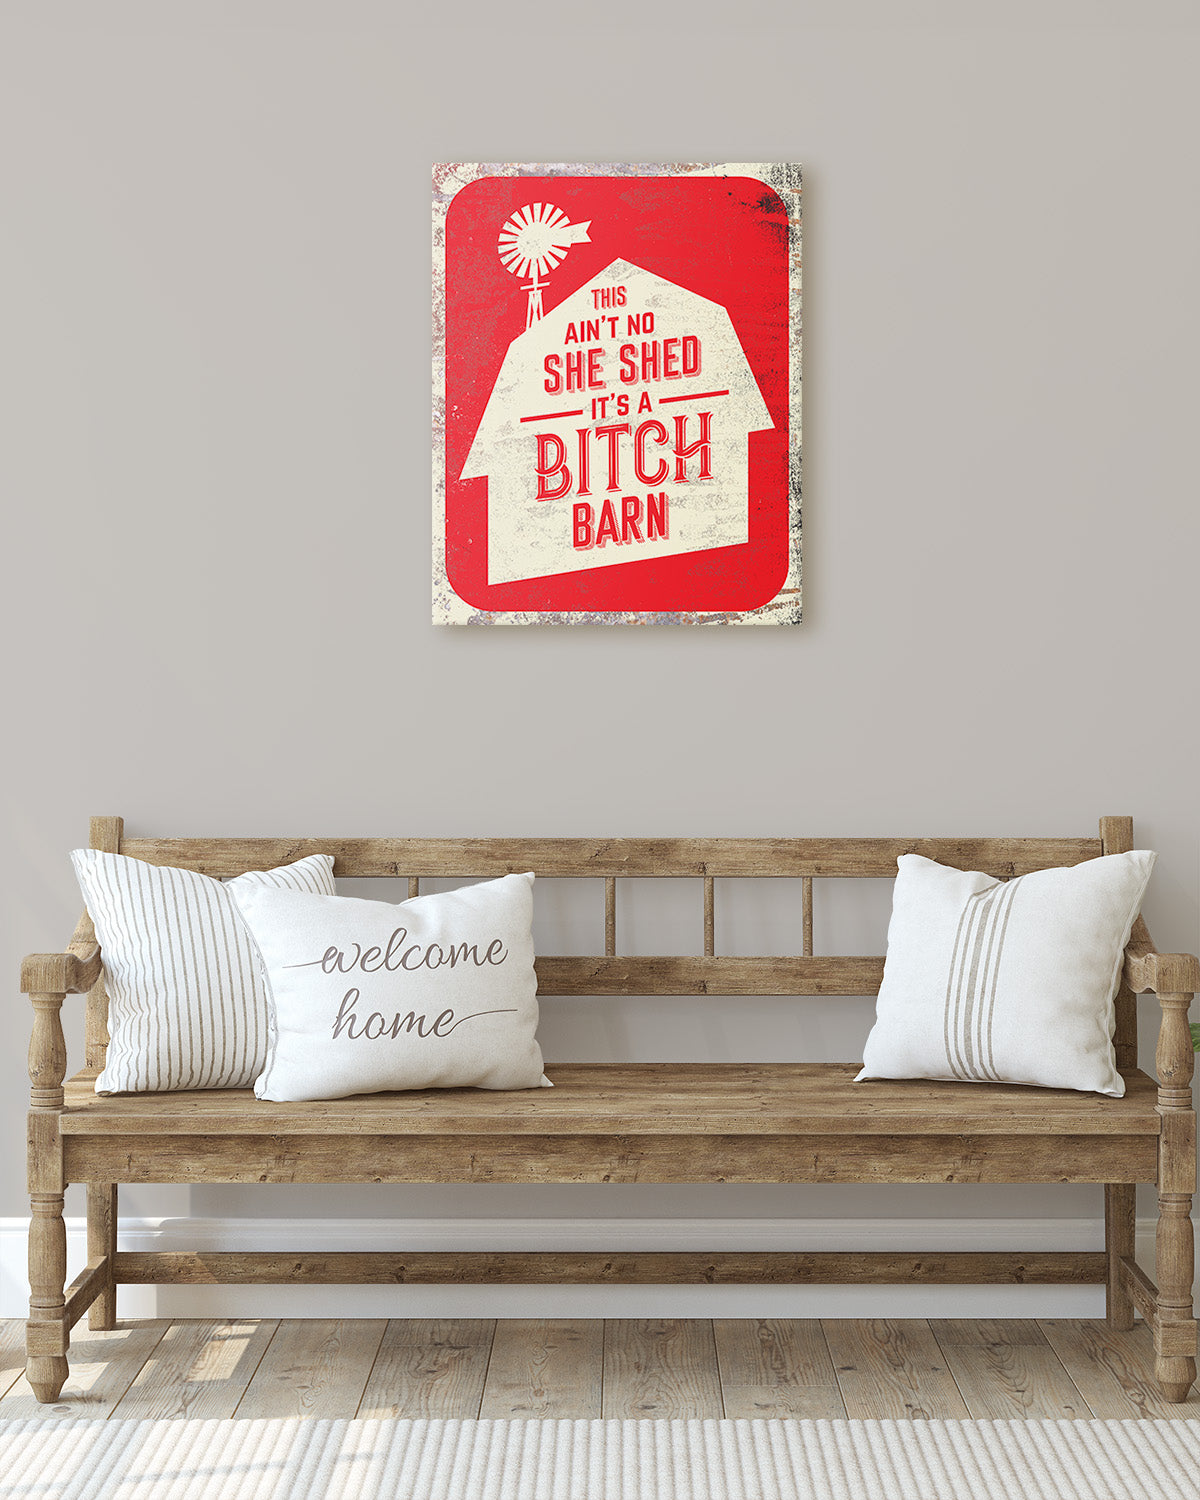 This Ain't No She Shed. It's A Bitch Barn - Wall Decor Art Print with a red background